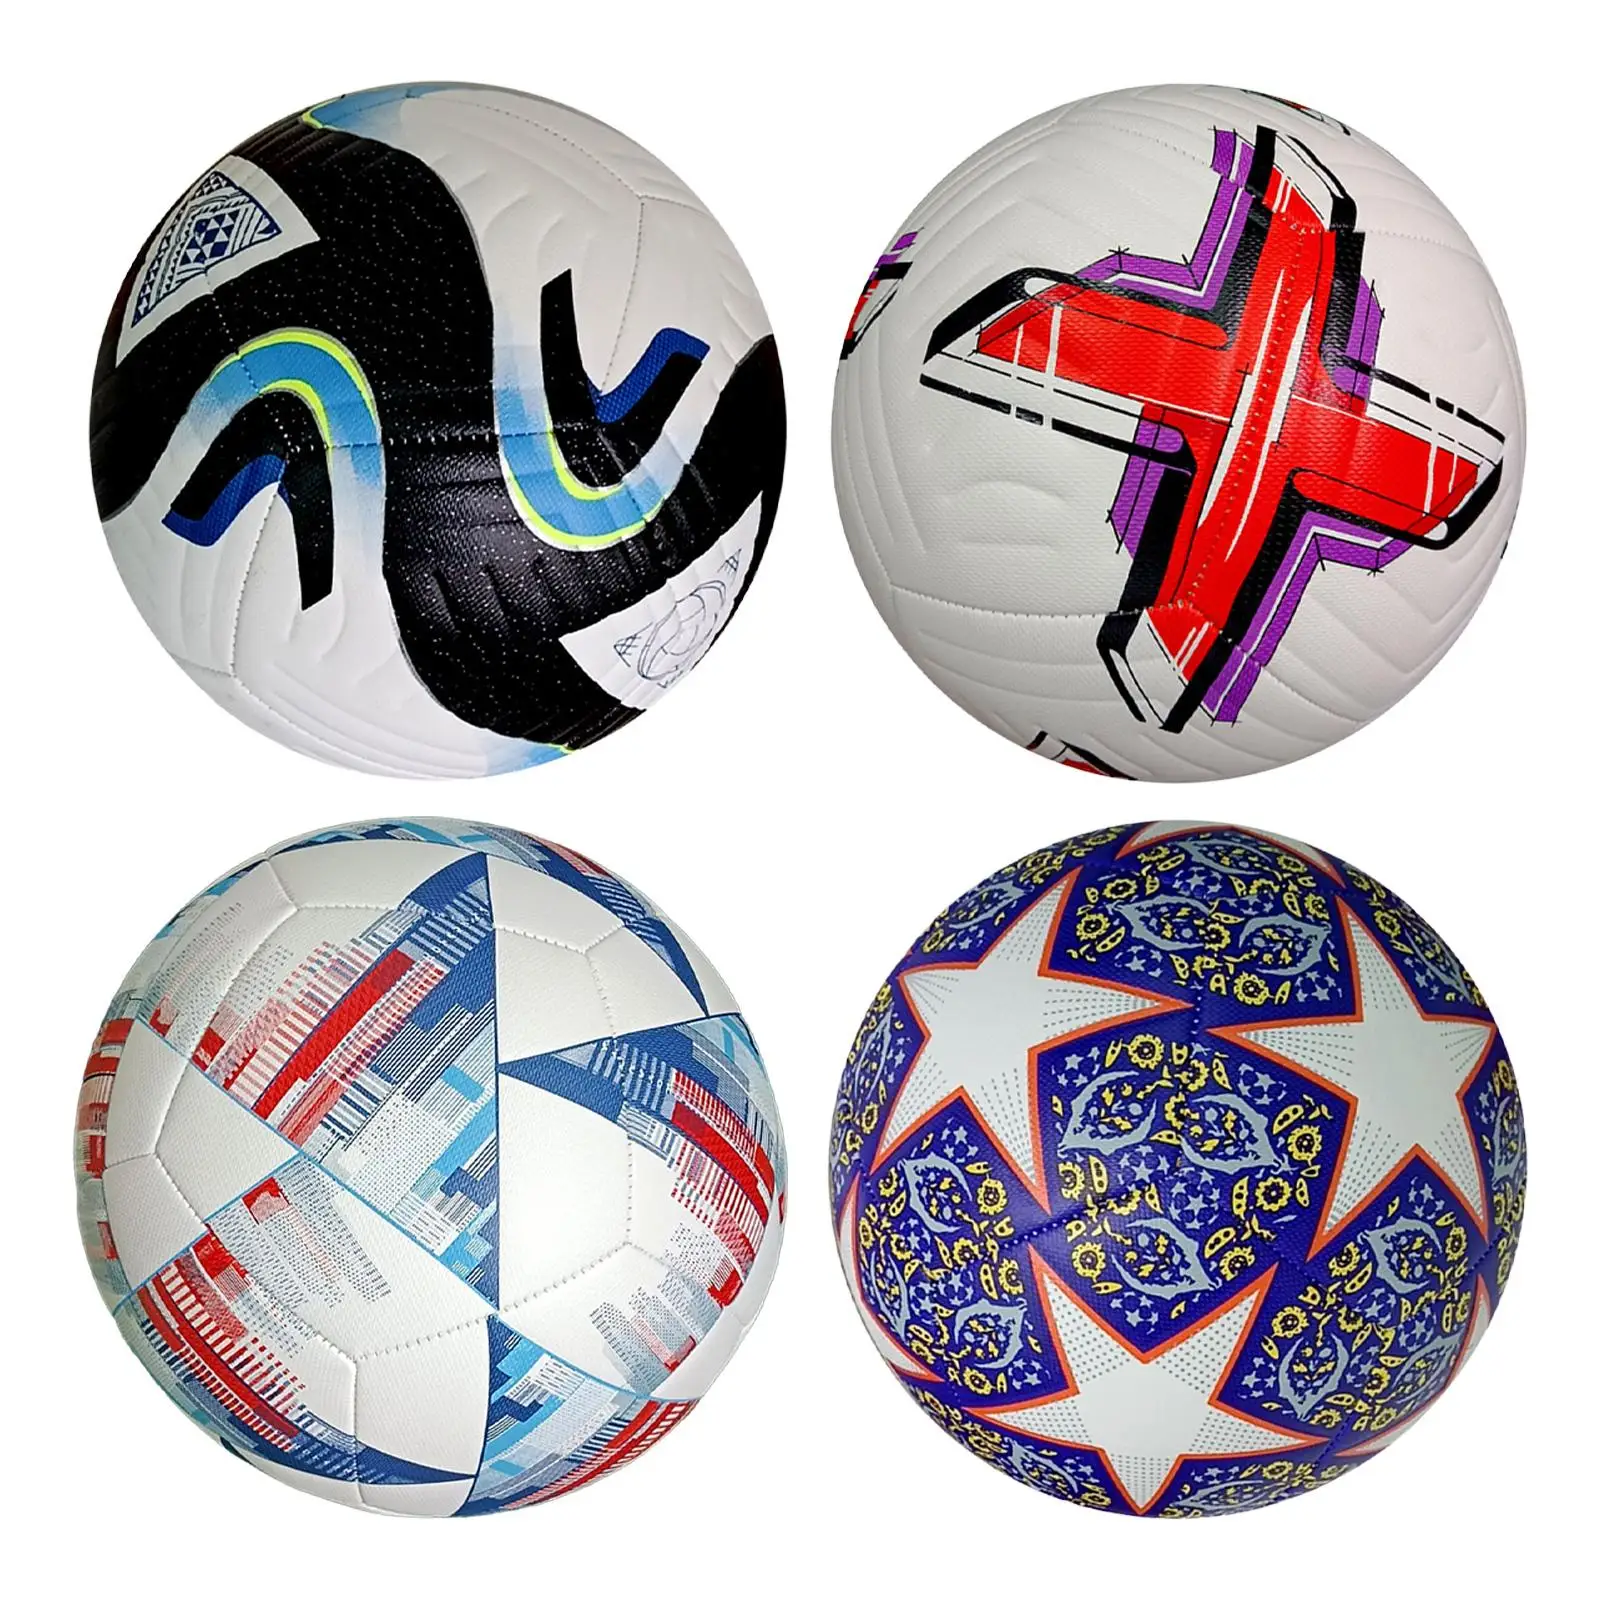 Soccer Ball Size 5 Seamless Stitching Football Durable High Quality PU Leather Official Match Ball Training Special